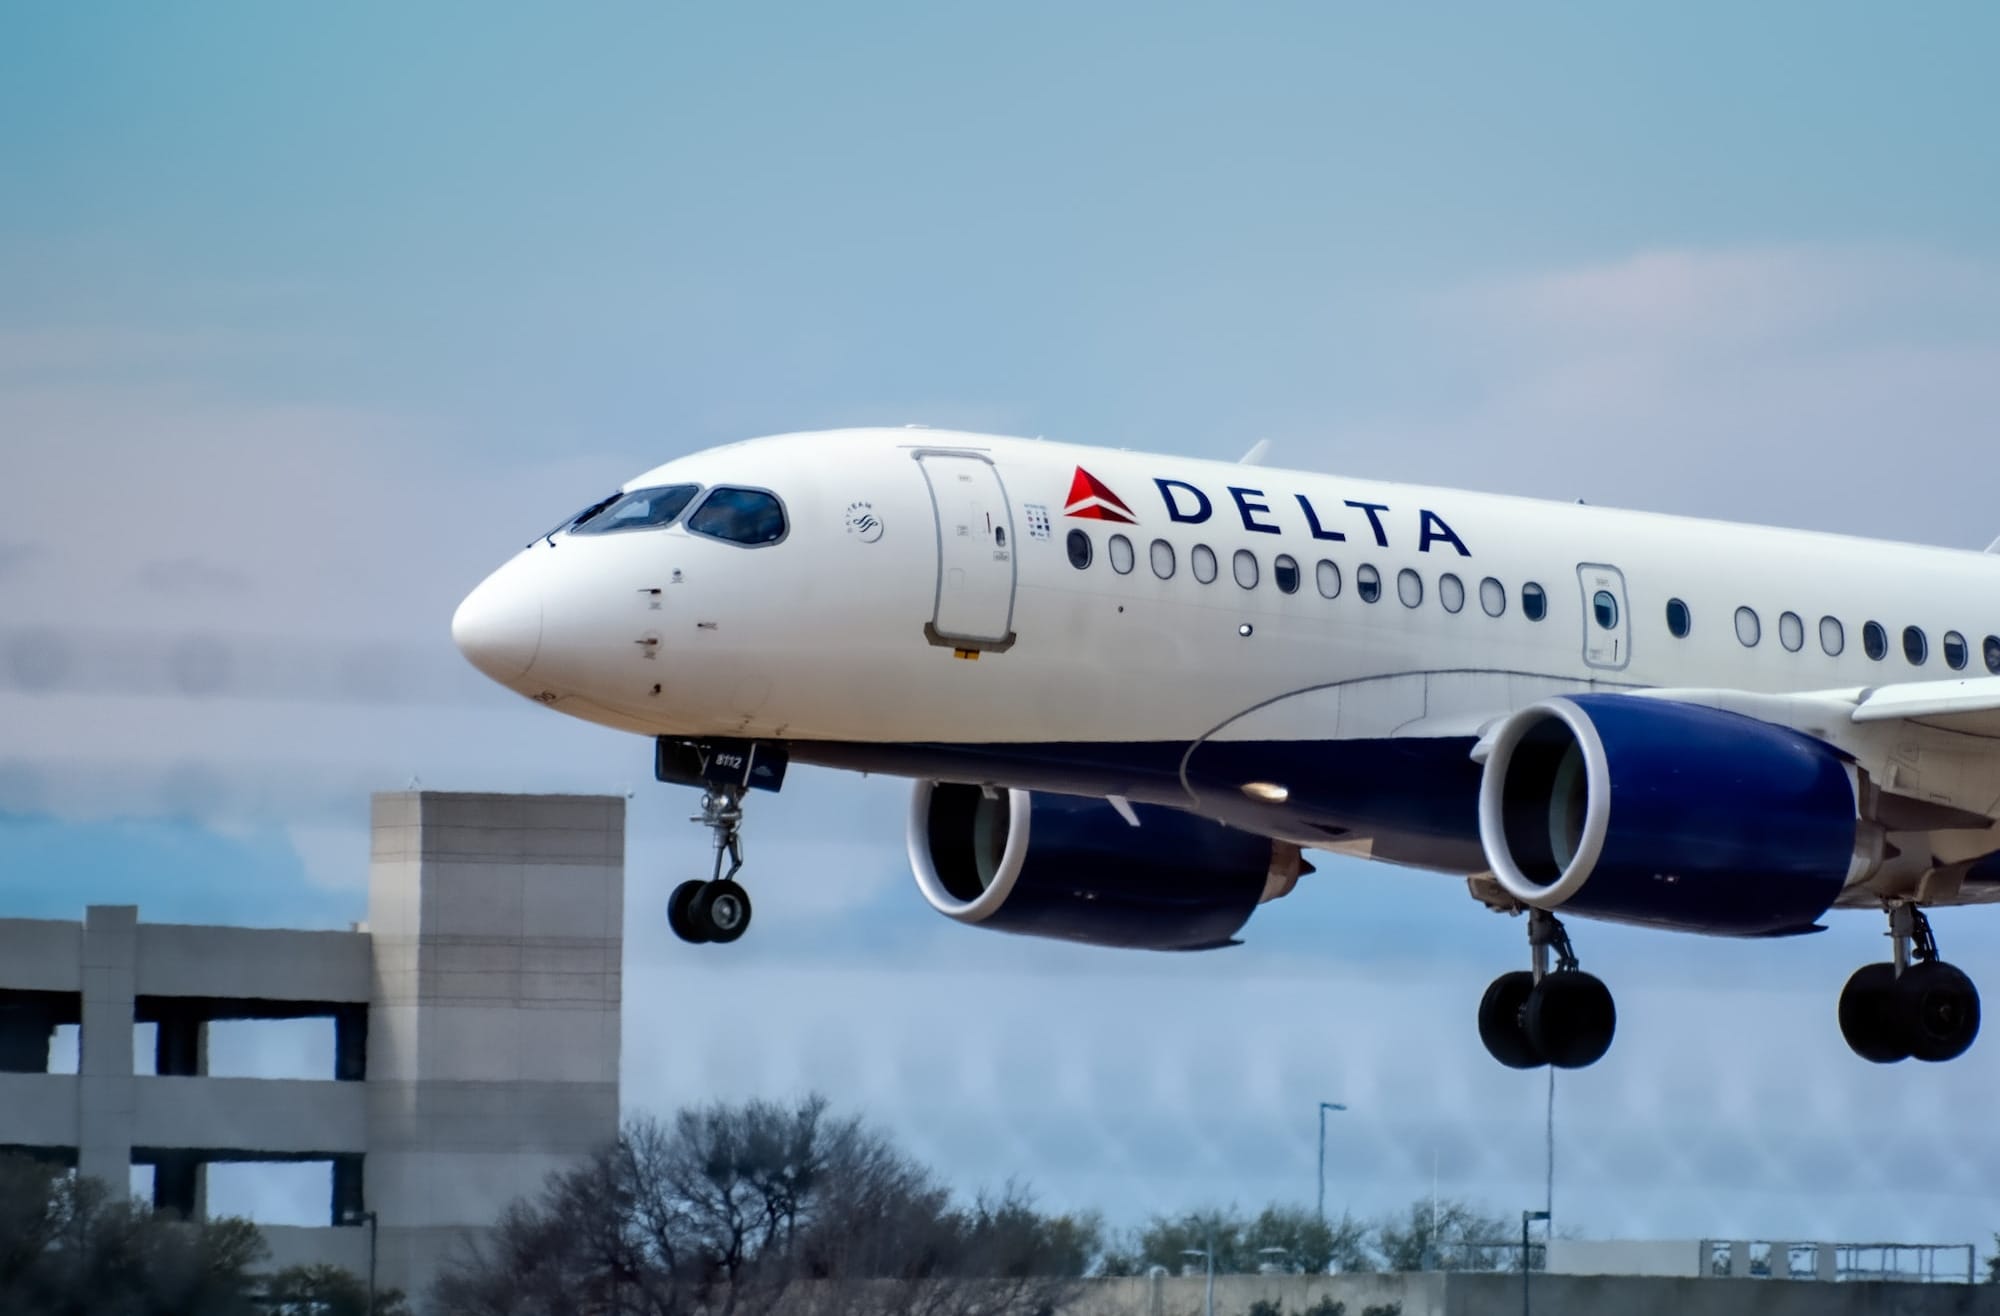 Delta Expands Touchless Digital ID Program to Major Airports Including LAX, LGA, and JFK